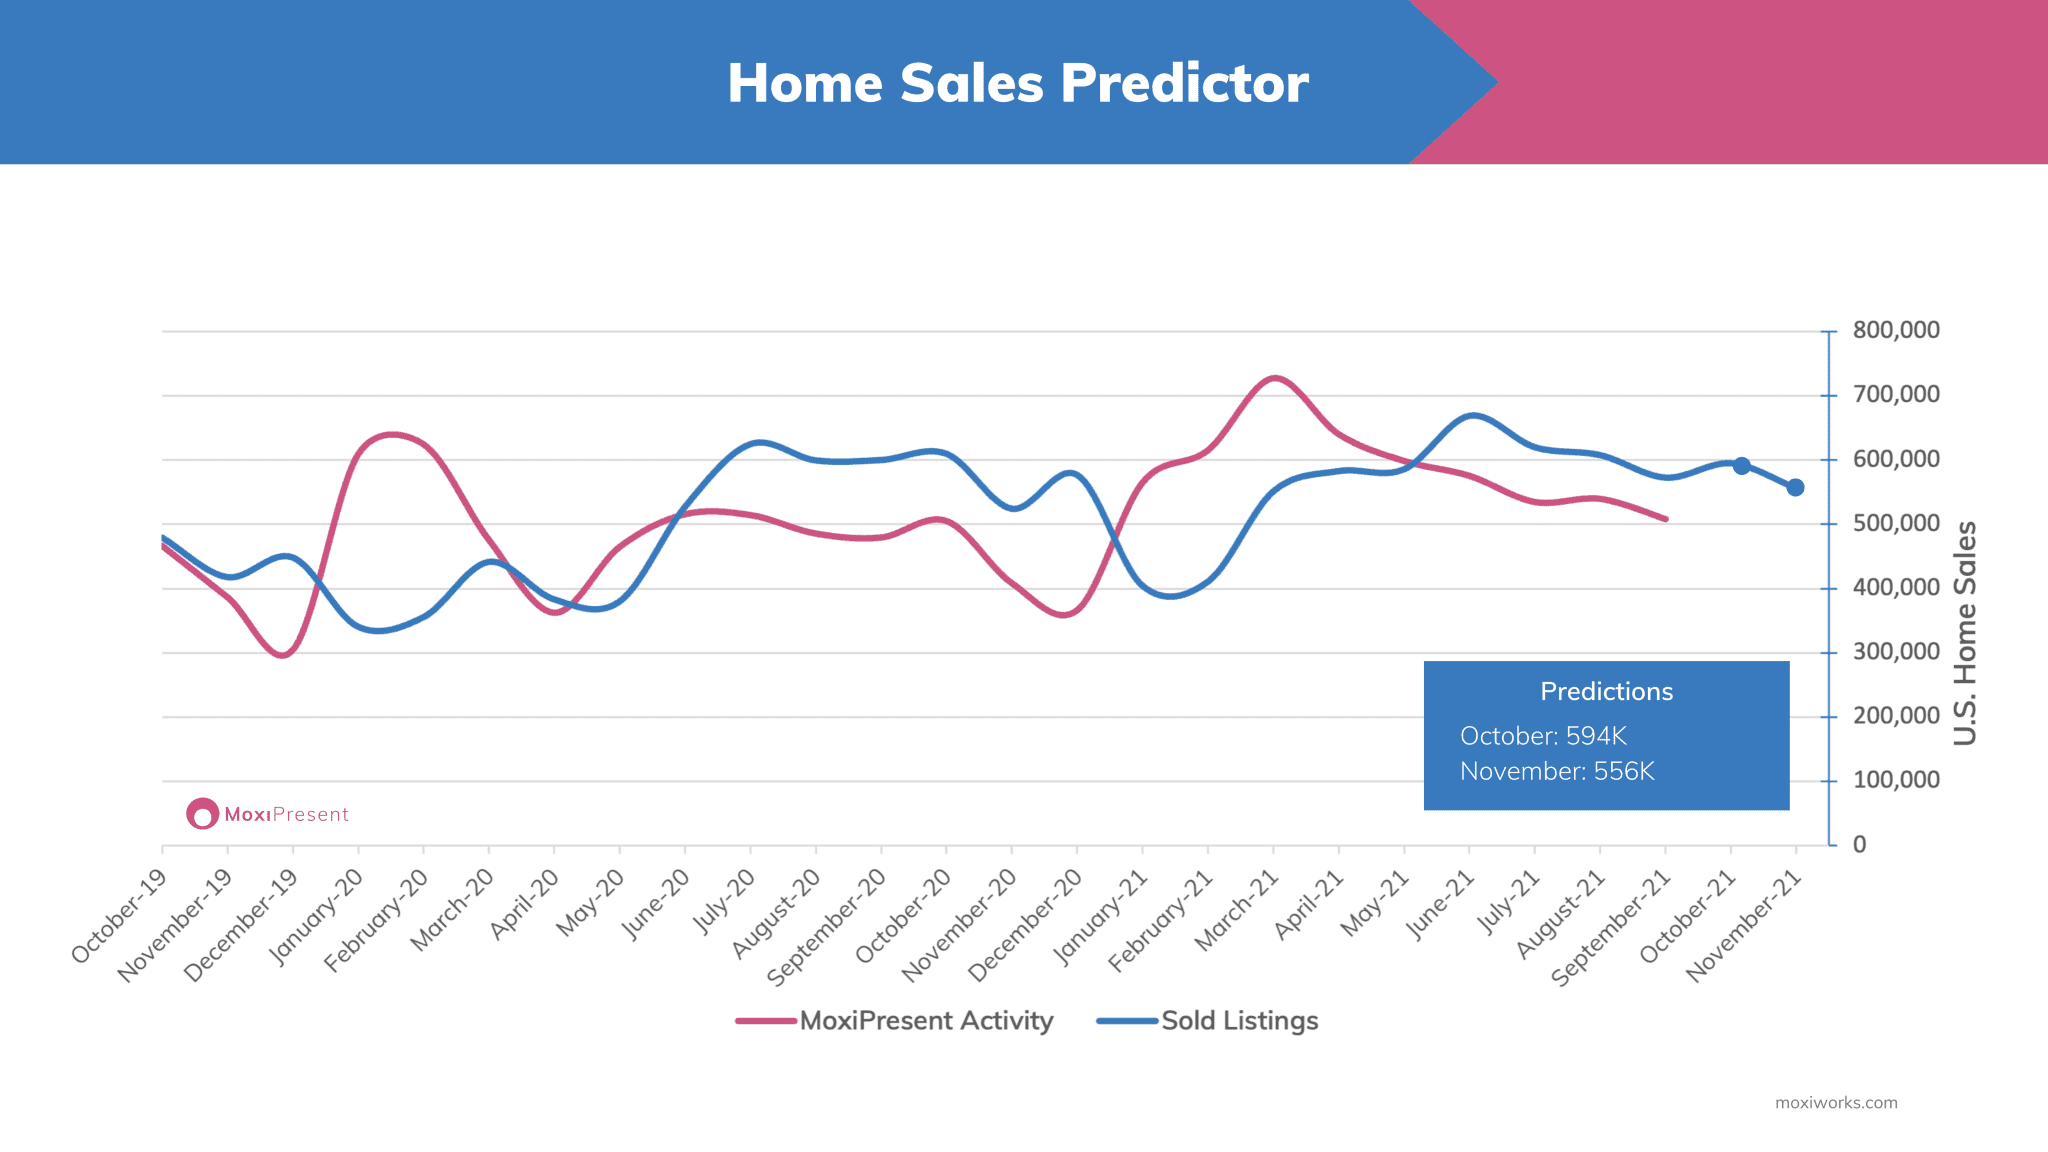 Fall-ing Number of Home Sales?